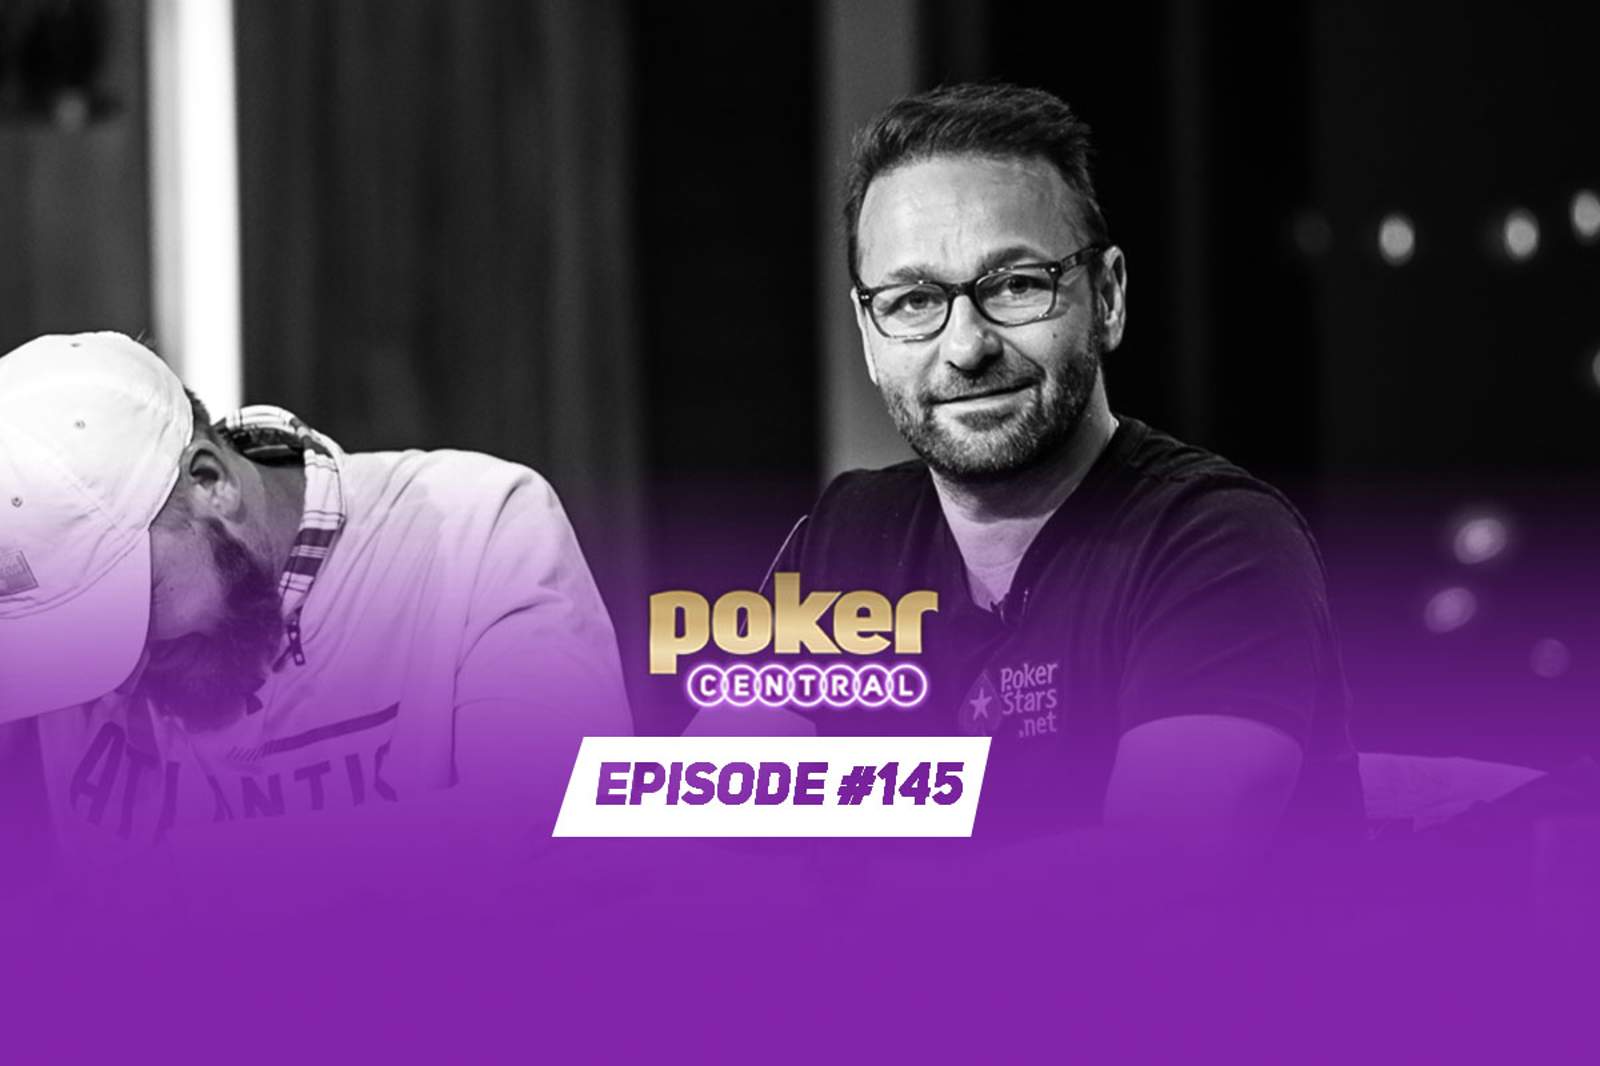 Ep. 145 Feuds, Drama, and Package Talk with Daniel Negreanu